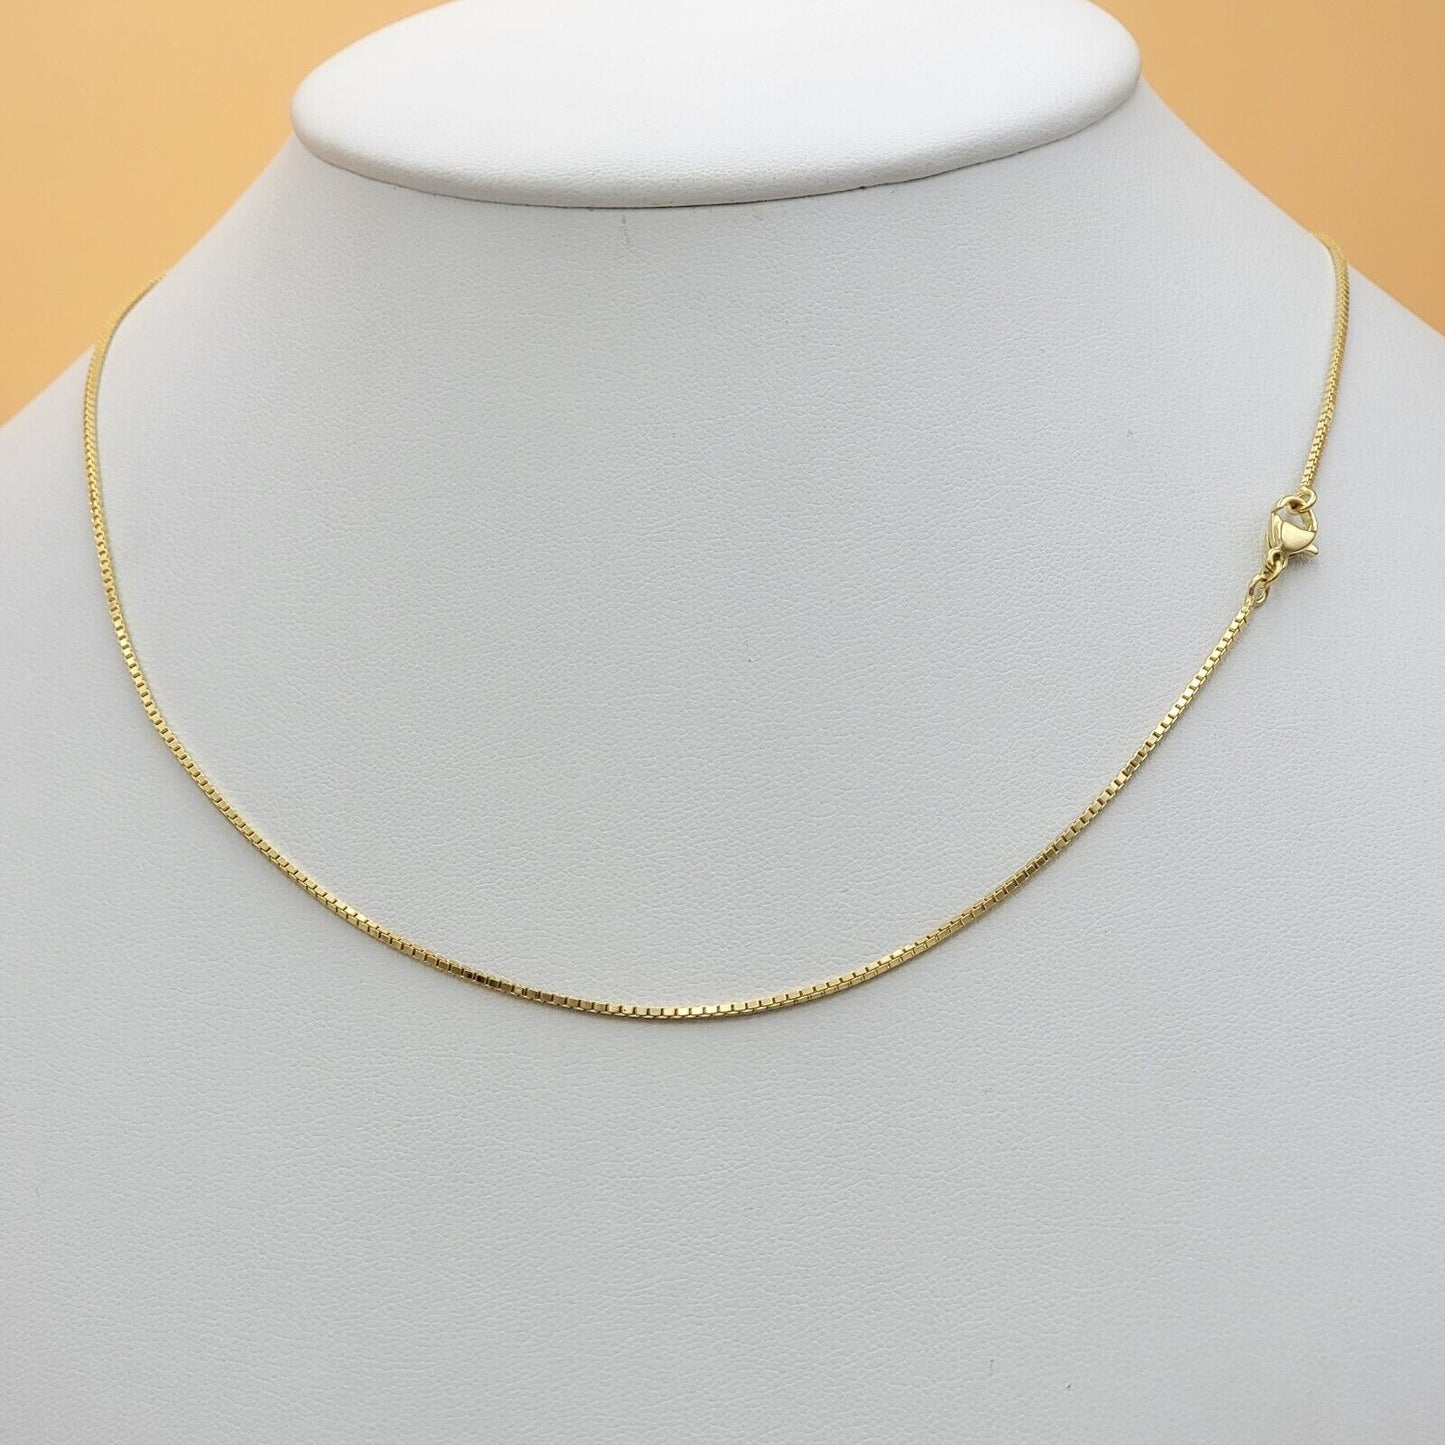 Necklaces - 14K Gold Plated. Chain Necklace - Box Style - 20in Long - 1.2mm